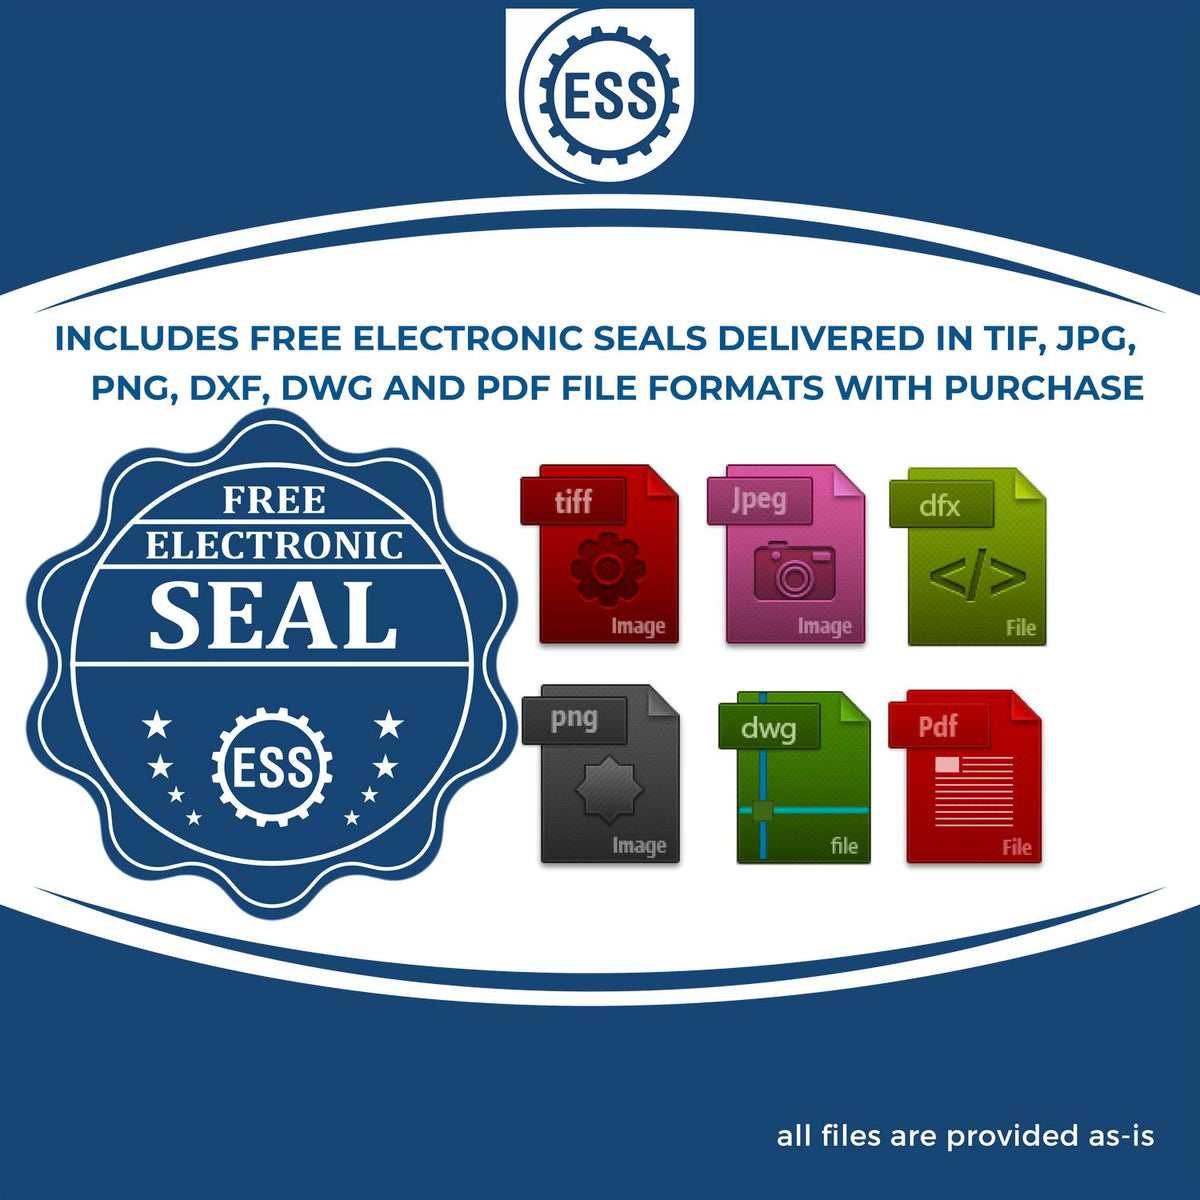 An infographic for the free electronic seal for the Slim Pre-Inked Nevada Architect Seal Stamp illustrating the different file type icons such as DXF, DWG, TIF, JPG and PNG.